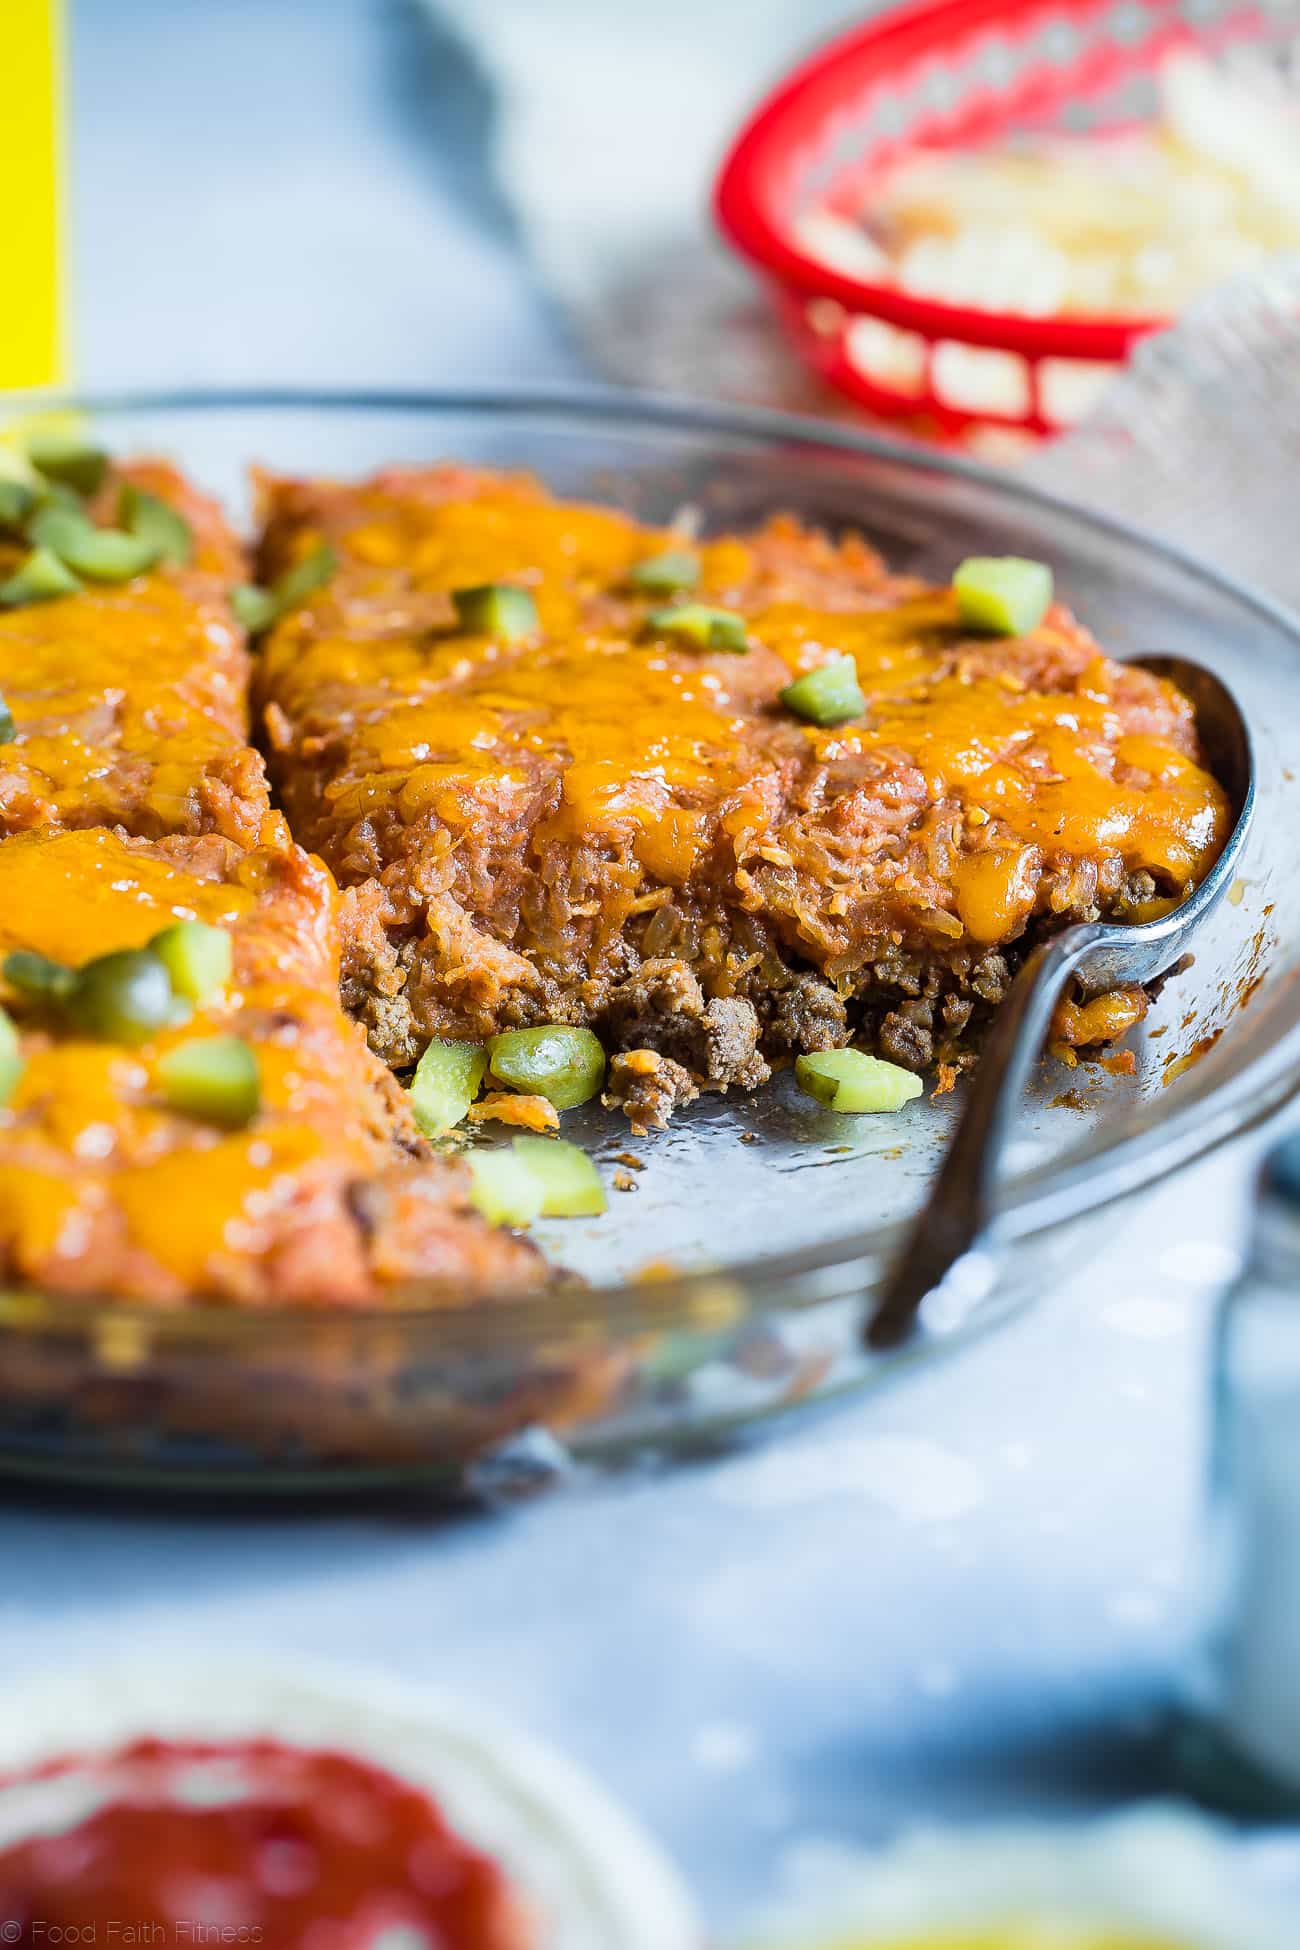 Low Carb Cheeseburger Spaghetti Squash Casserole - Healthy comfort food at it's best! All the cheeseburger taste without all the carbs! A healthy and gluten free, crowd-pleasing dinner that the whole family will love! | FoodFaithFitness.com | @FoodFaithFit